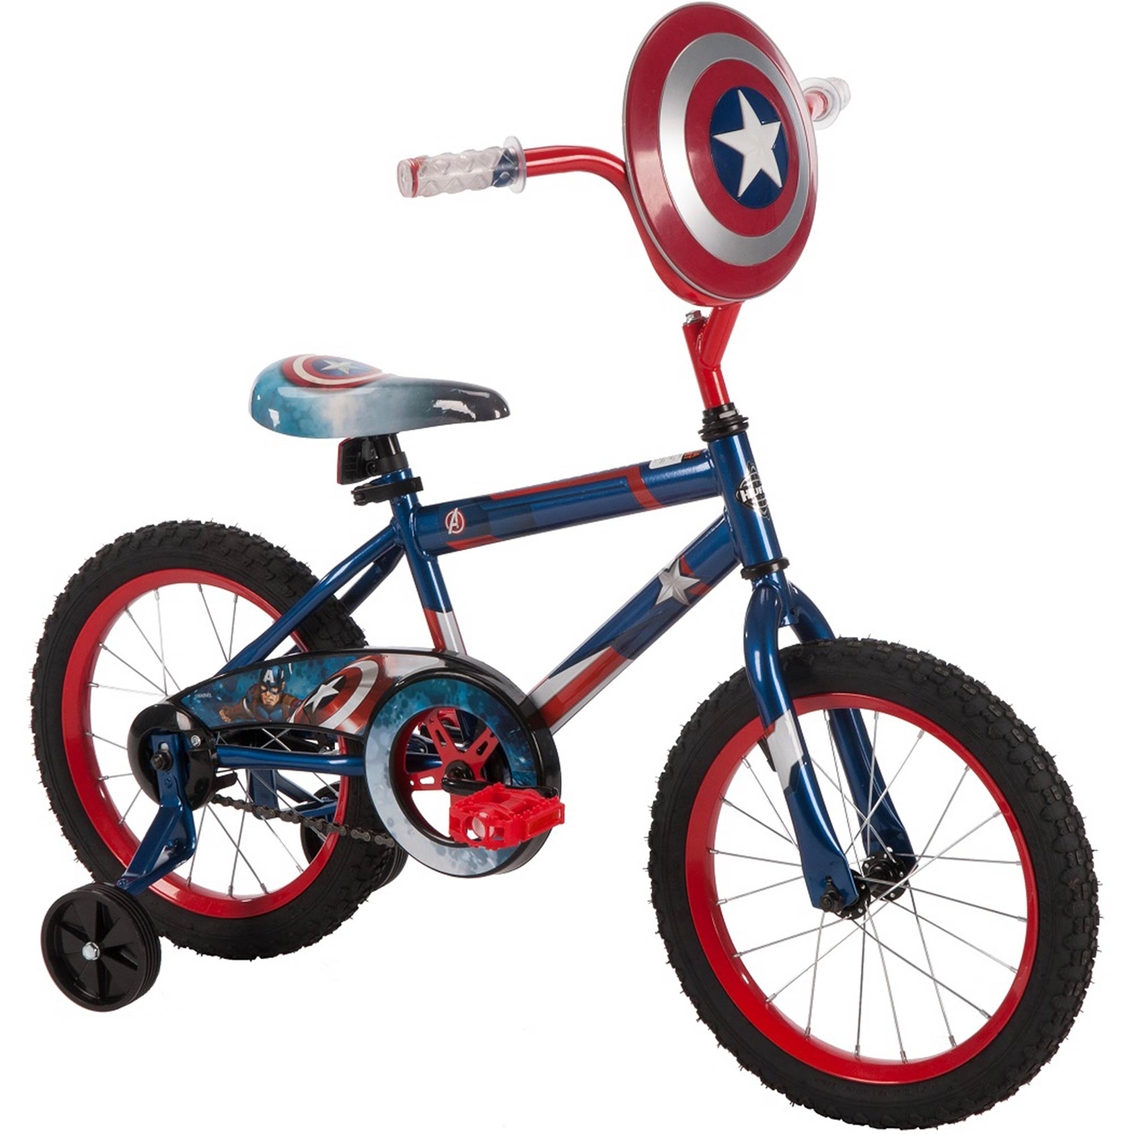 huffy captain america scooter